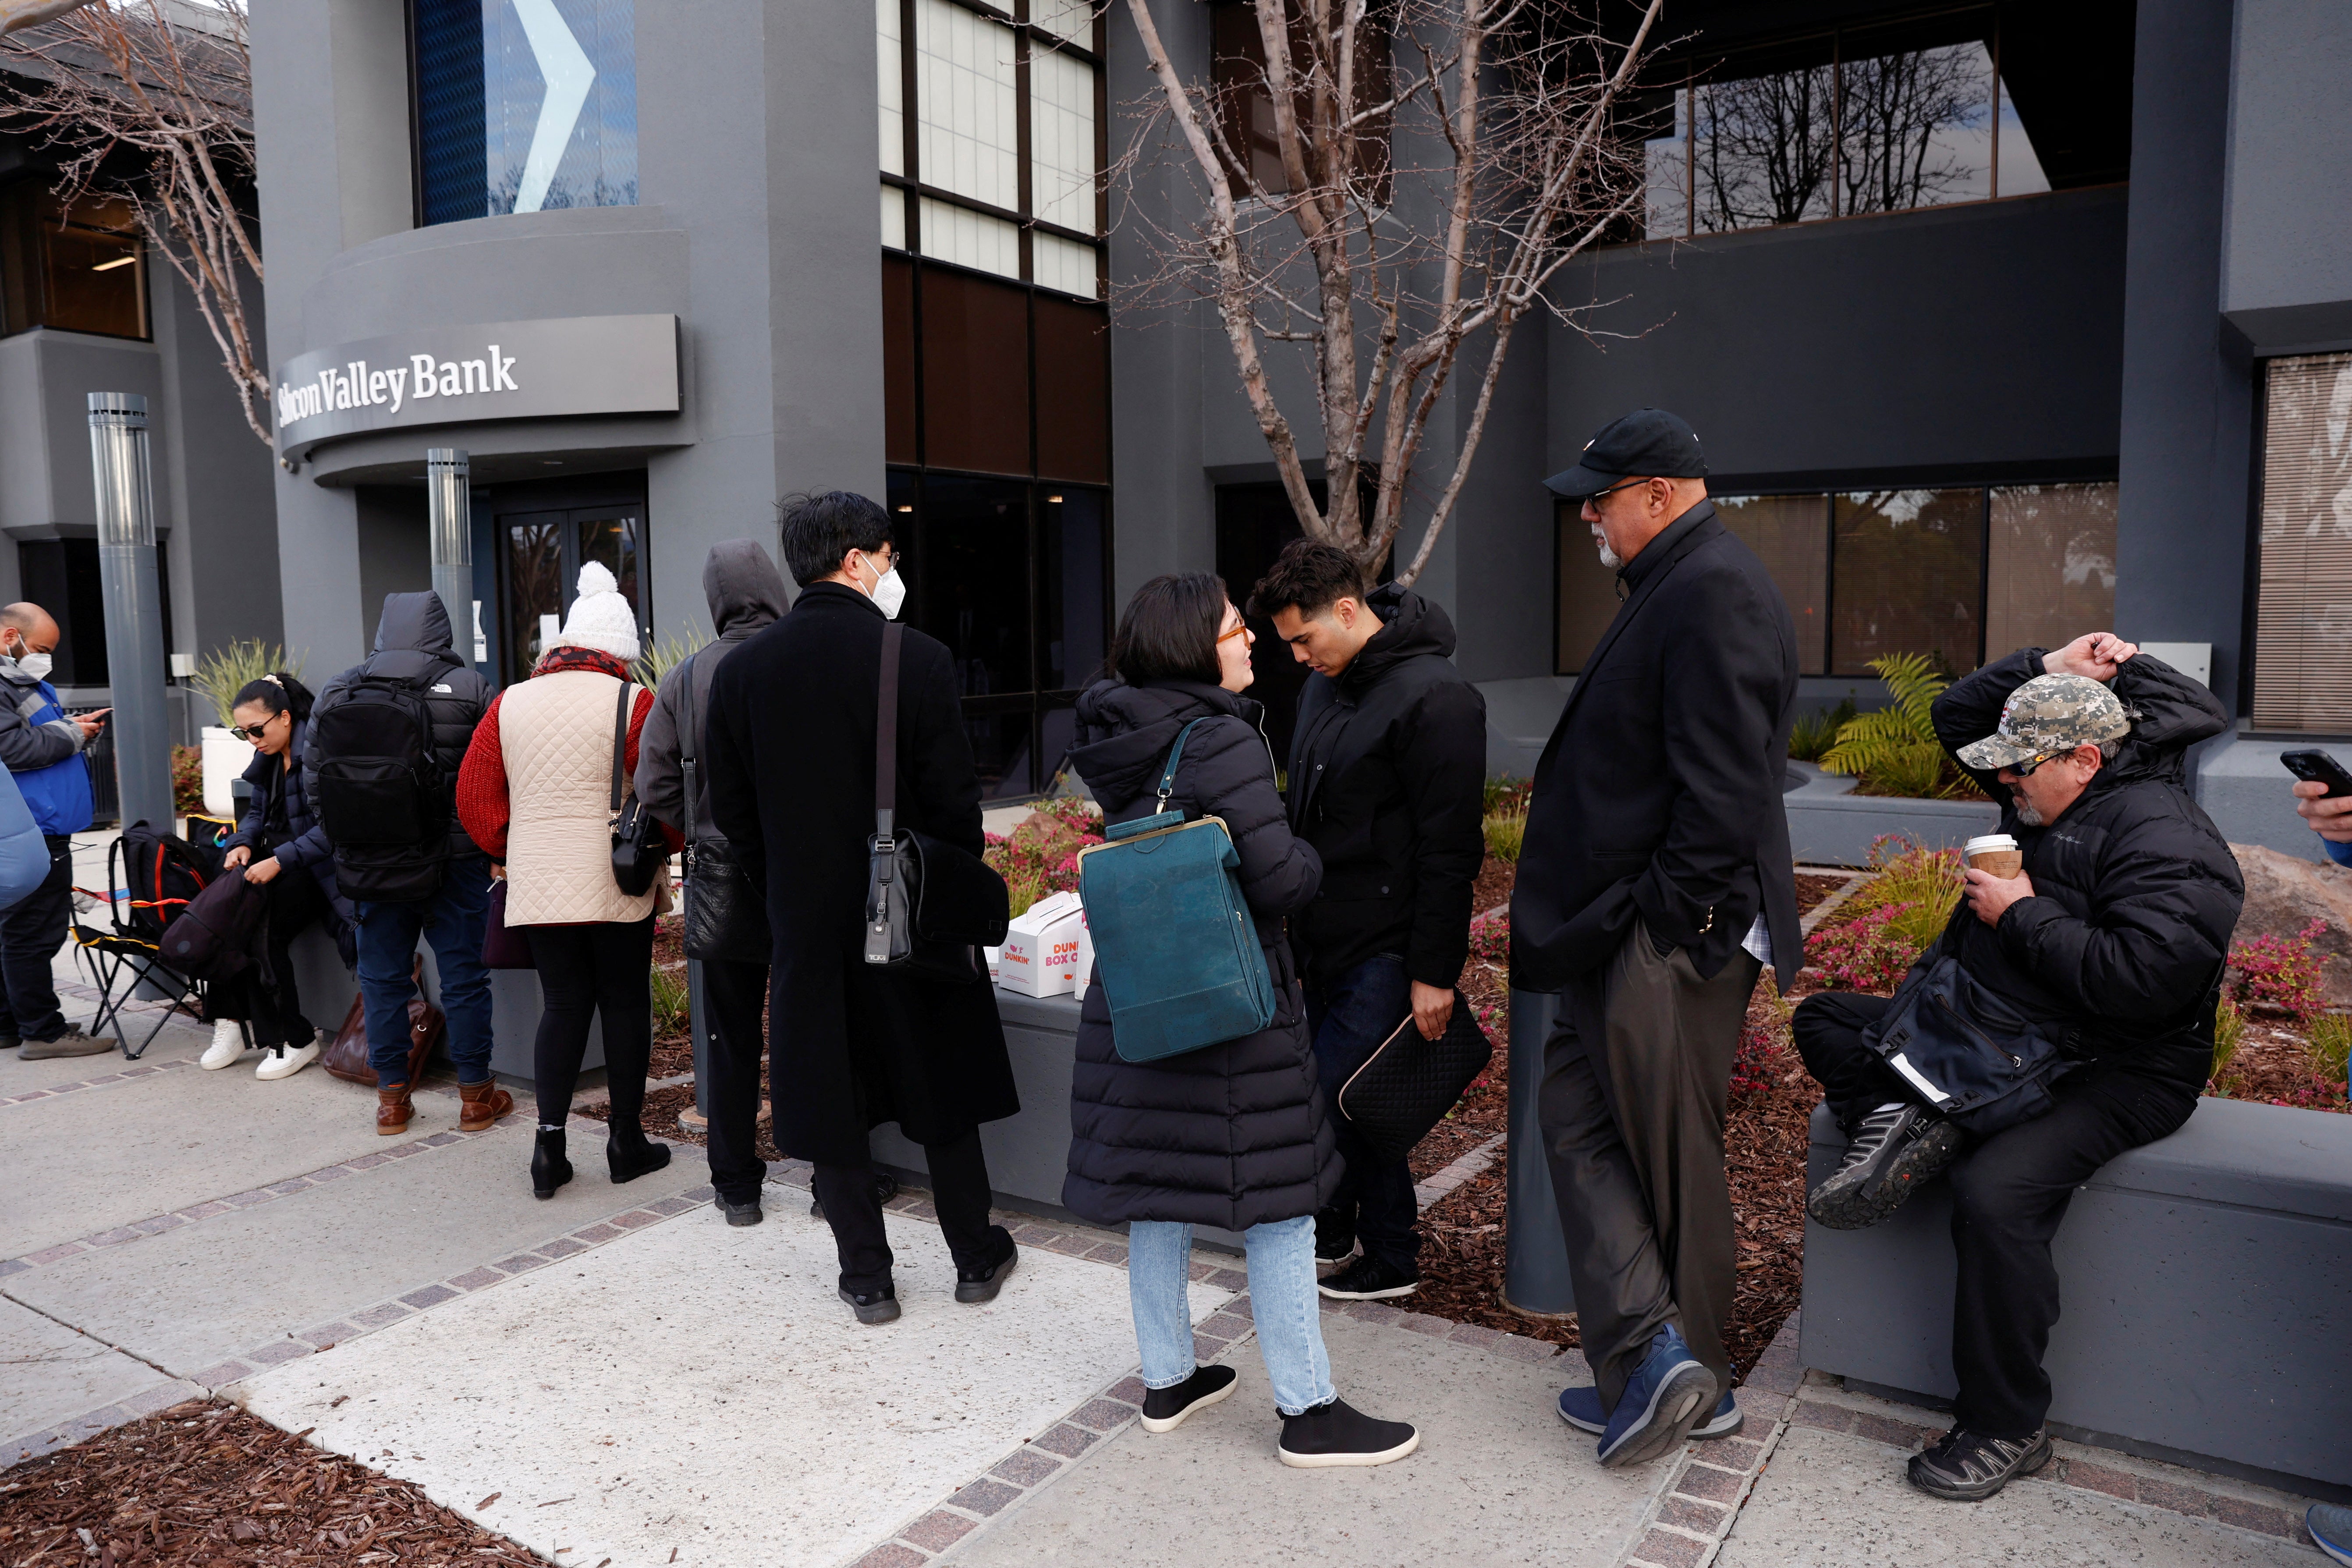 Customers line up outside the Silicon Valley Bank headquarters in Santa Clara, California on Monday